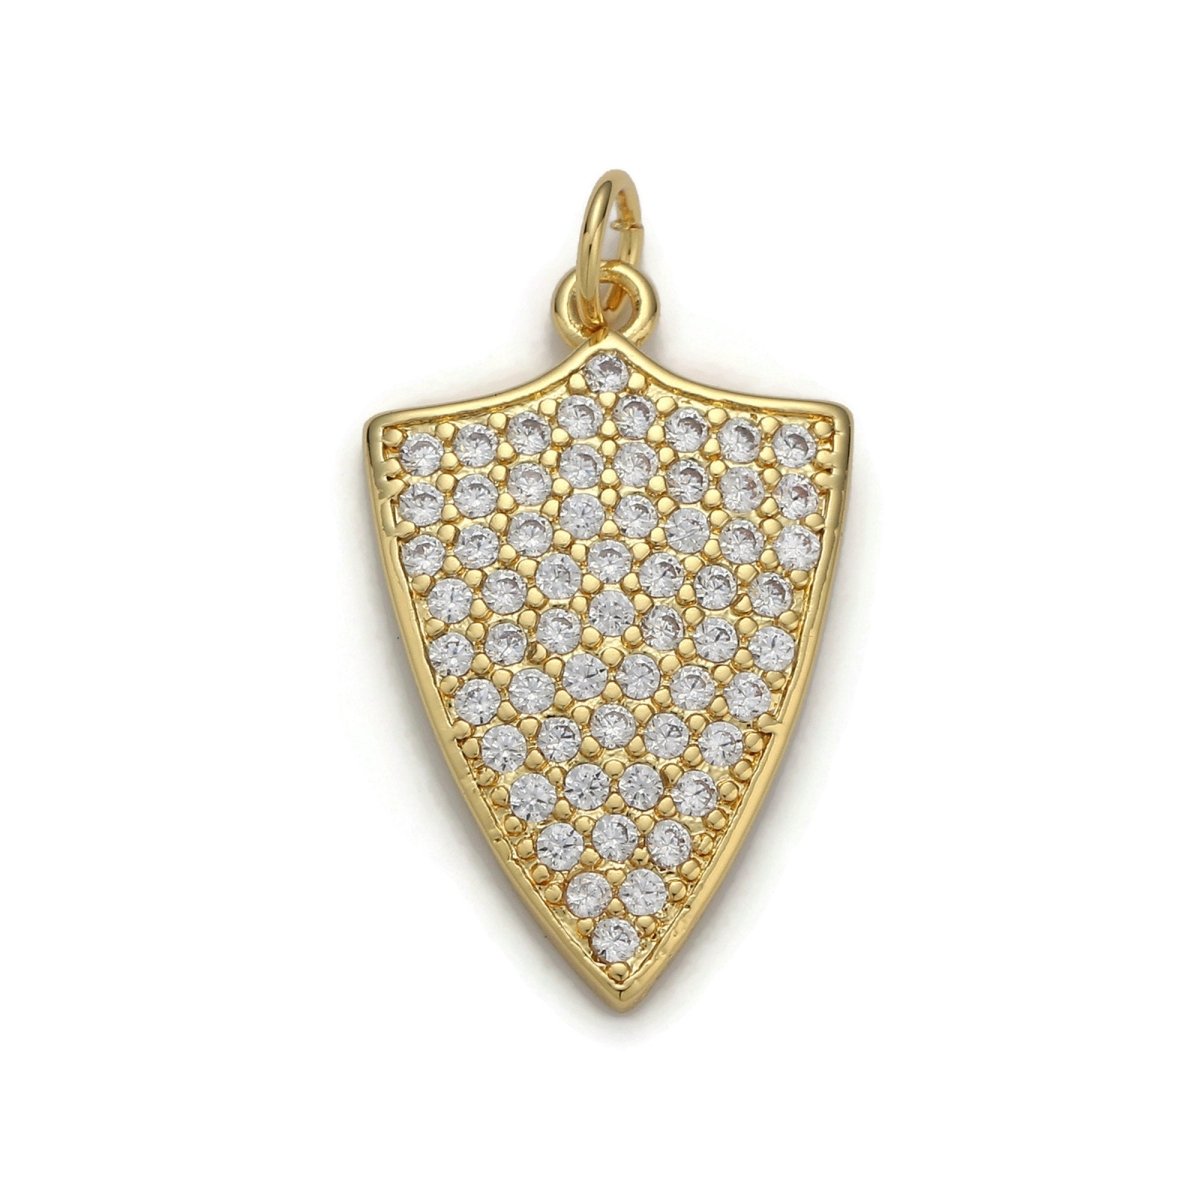 24k Gold Filled Micro Pave Shield Charm, Cubic Zirconia Shield Pendant Charm, Gold Filled Charm, For DIY Jewelry | D-033 - DLUXCA